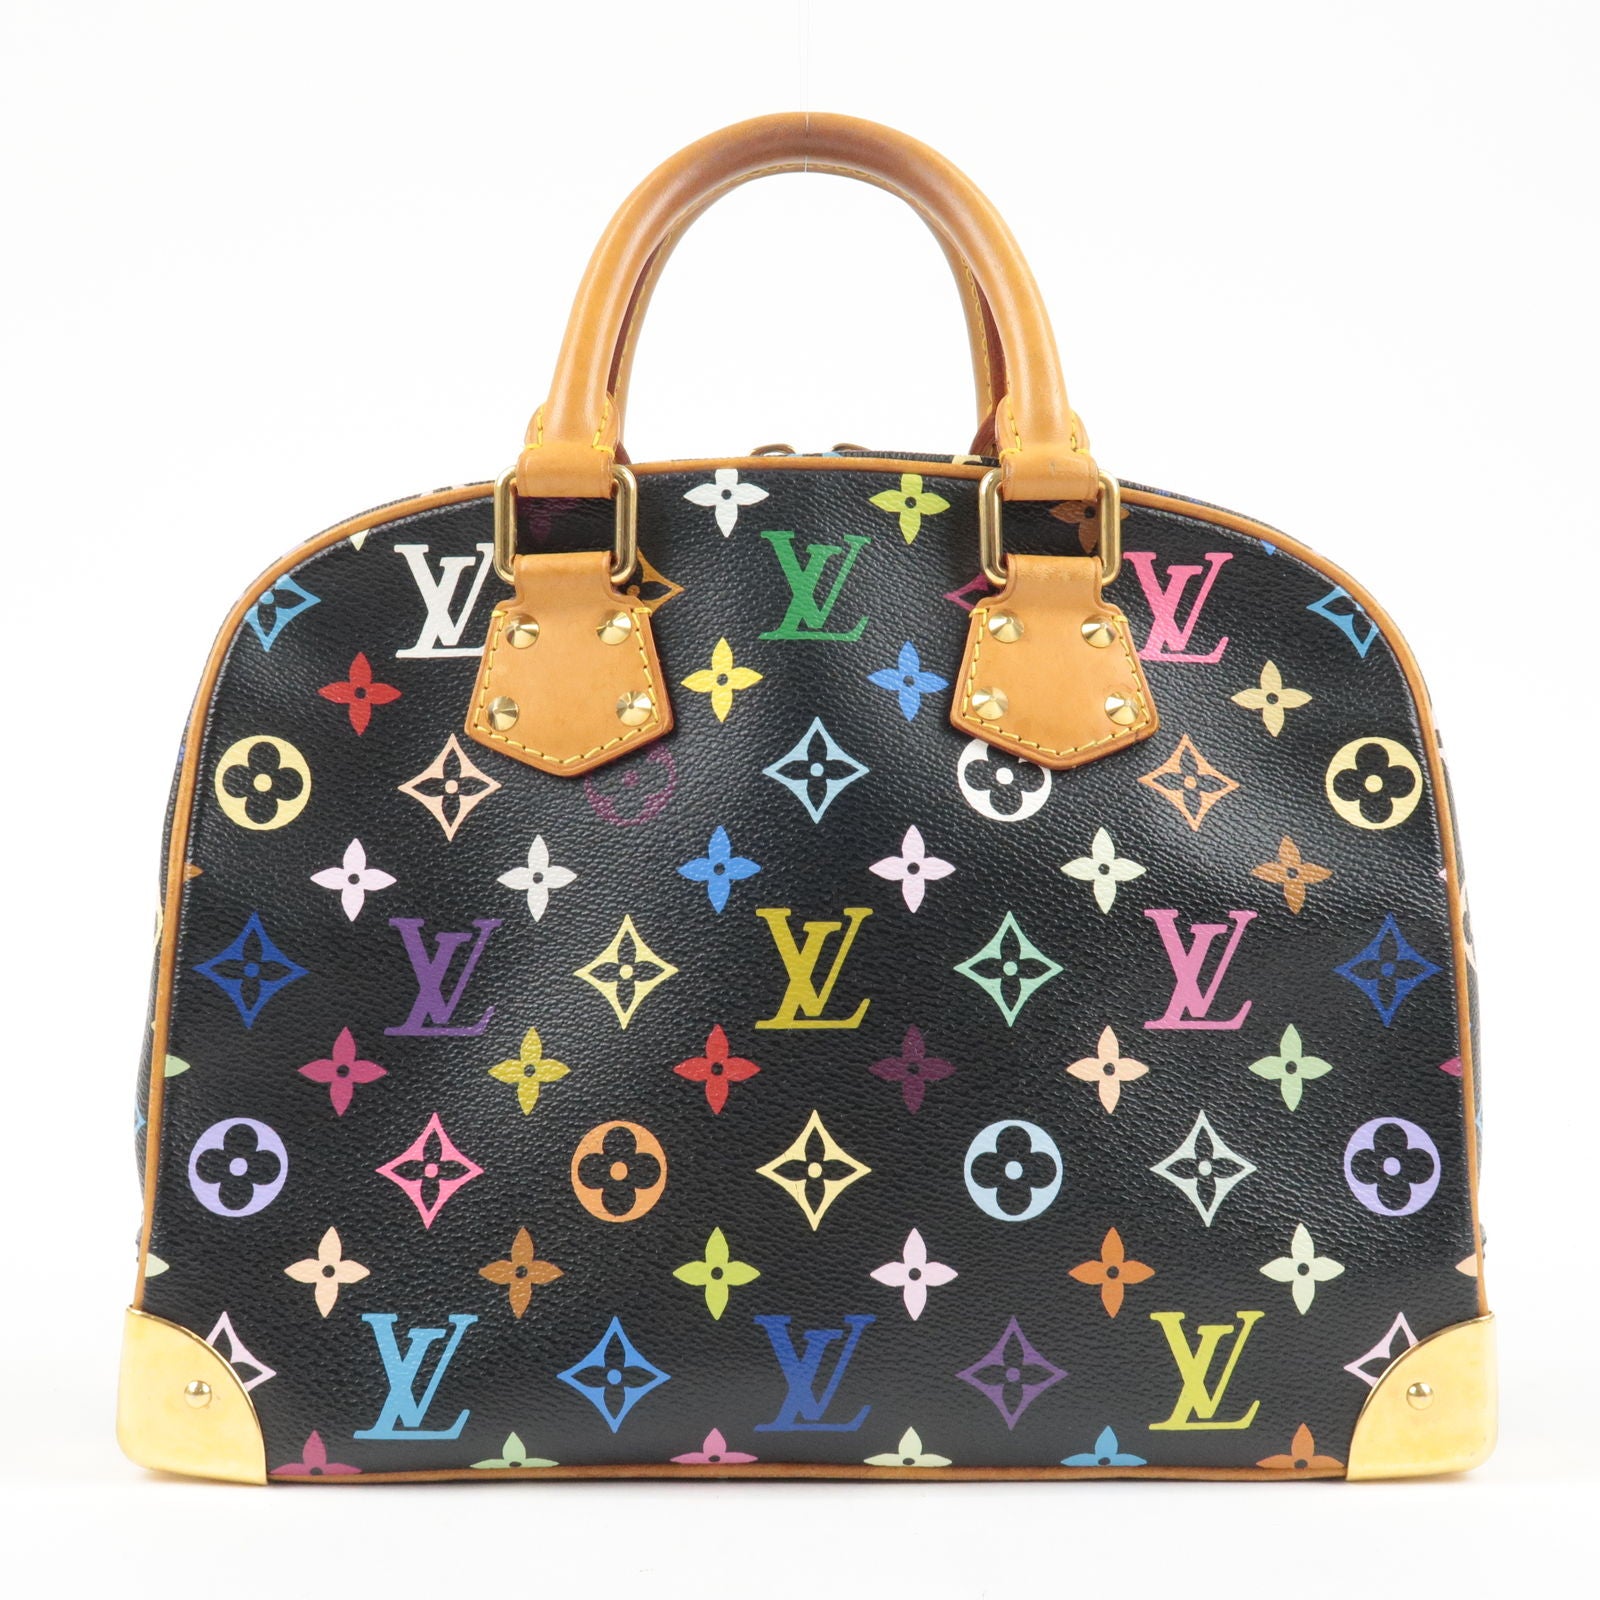 Microscopic 'Louis Vuitton' bag sells for more than $60,000